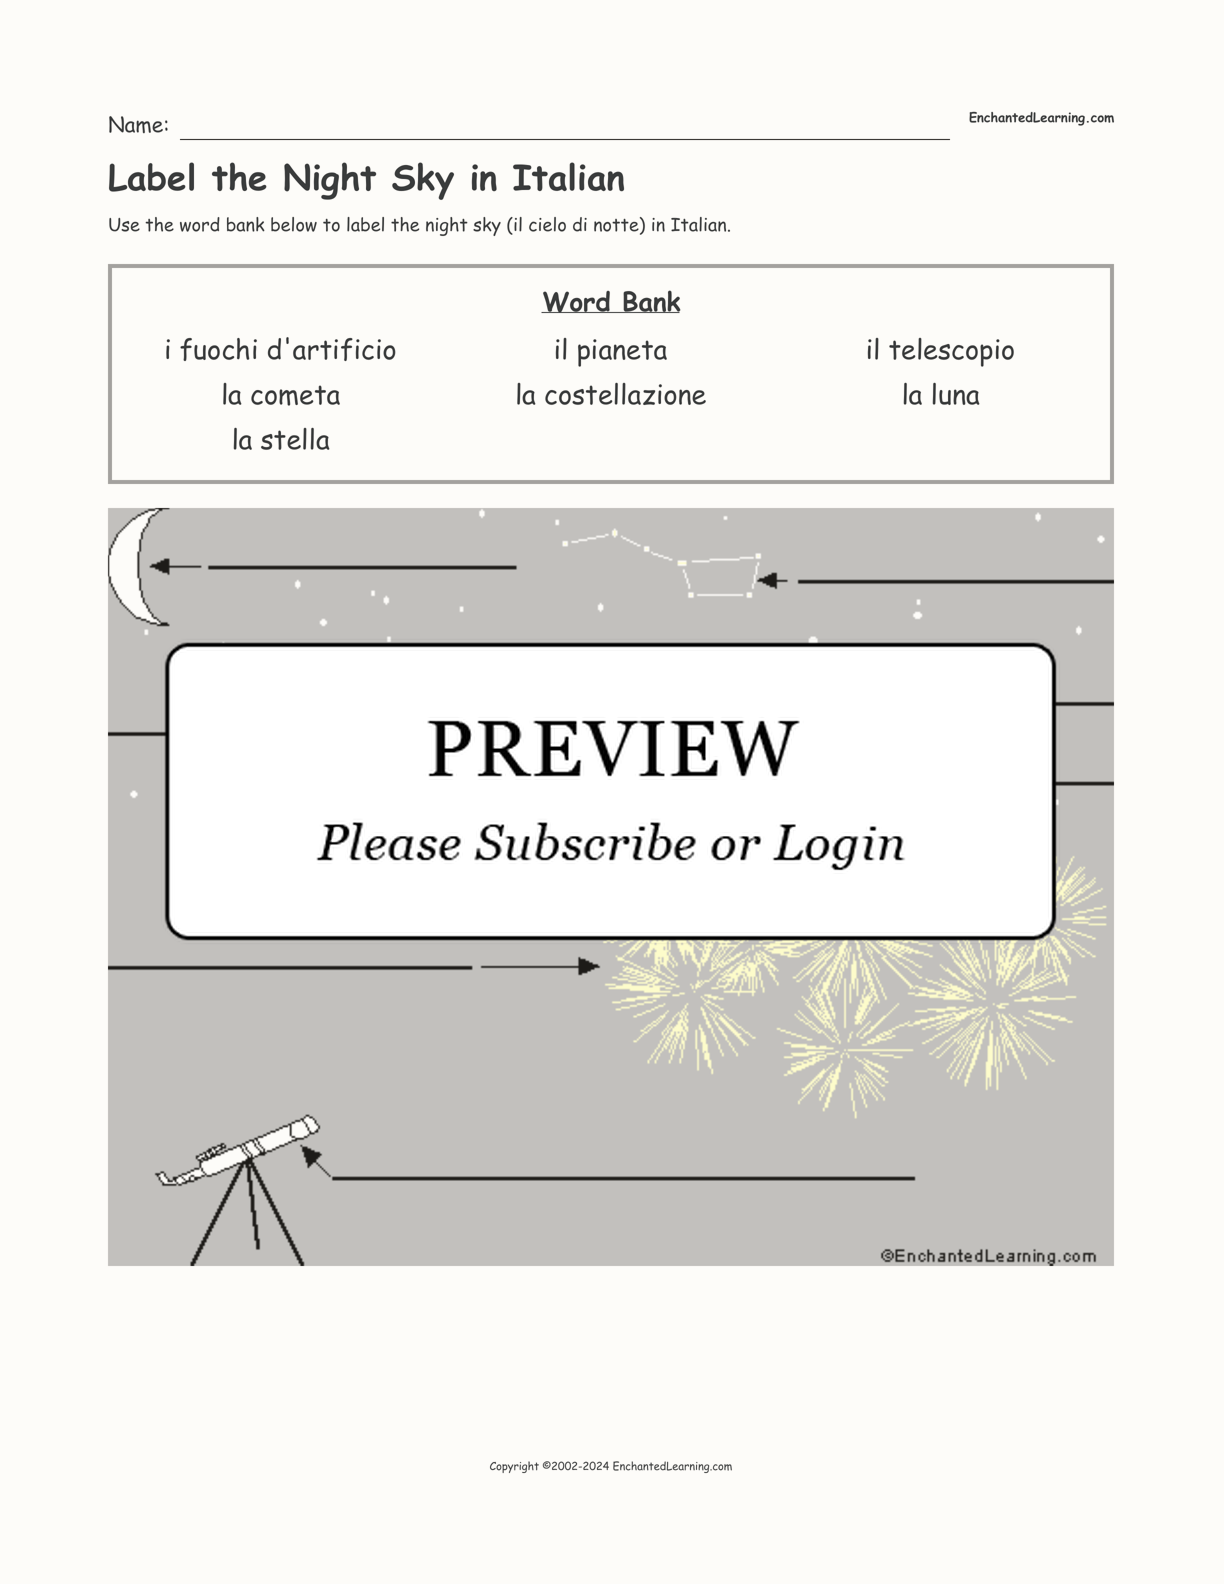 Label the Night Sky in Italian interactive worksheet page 1